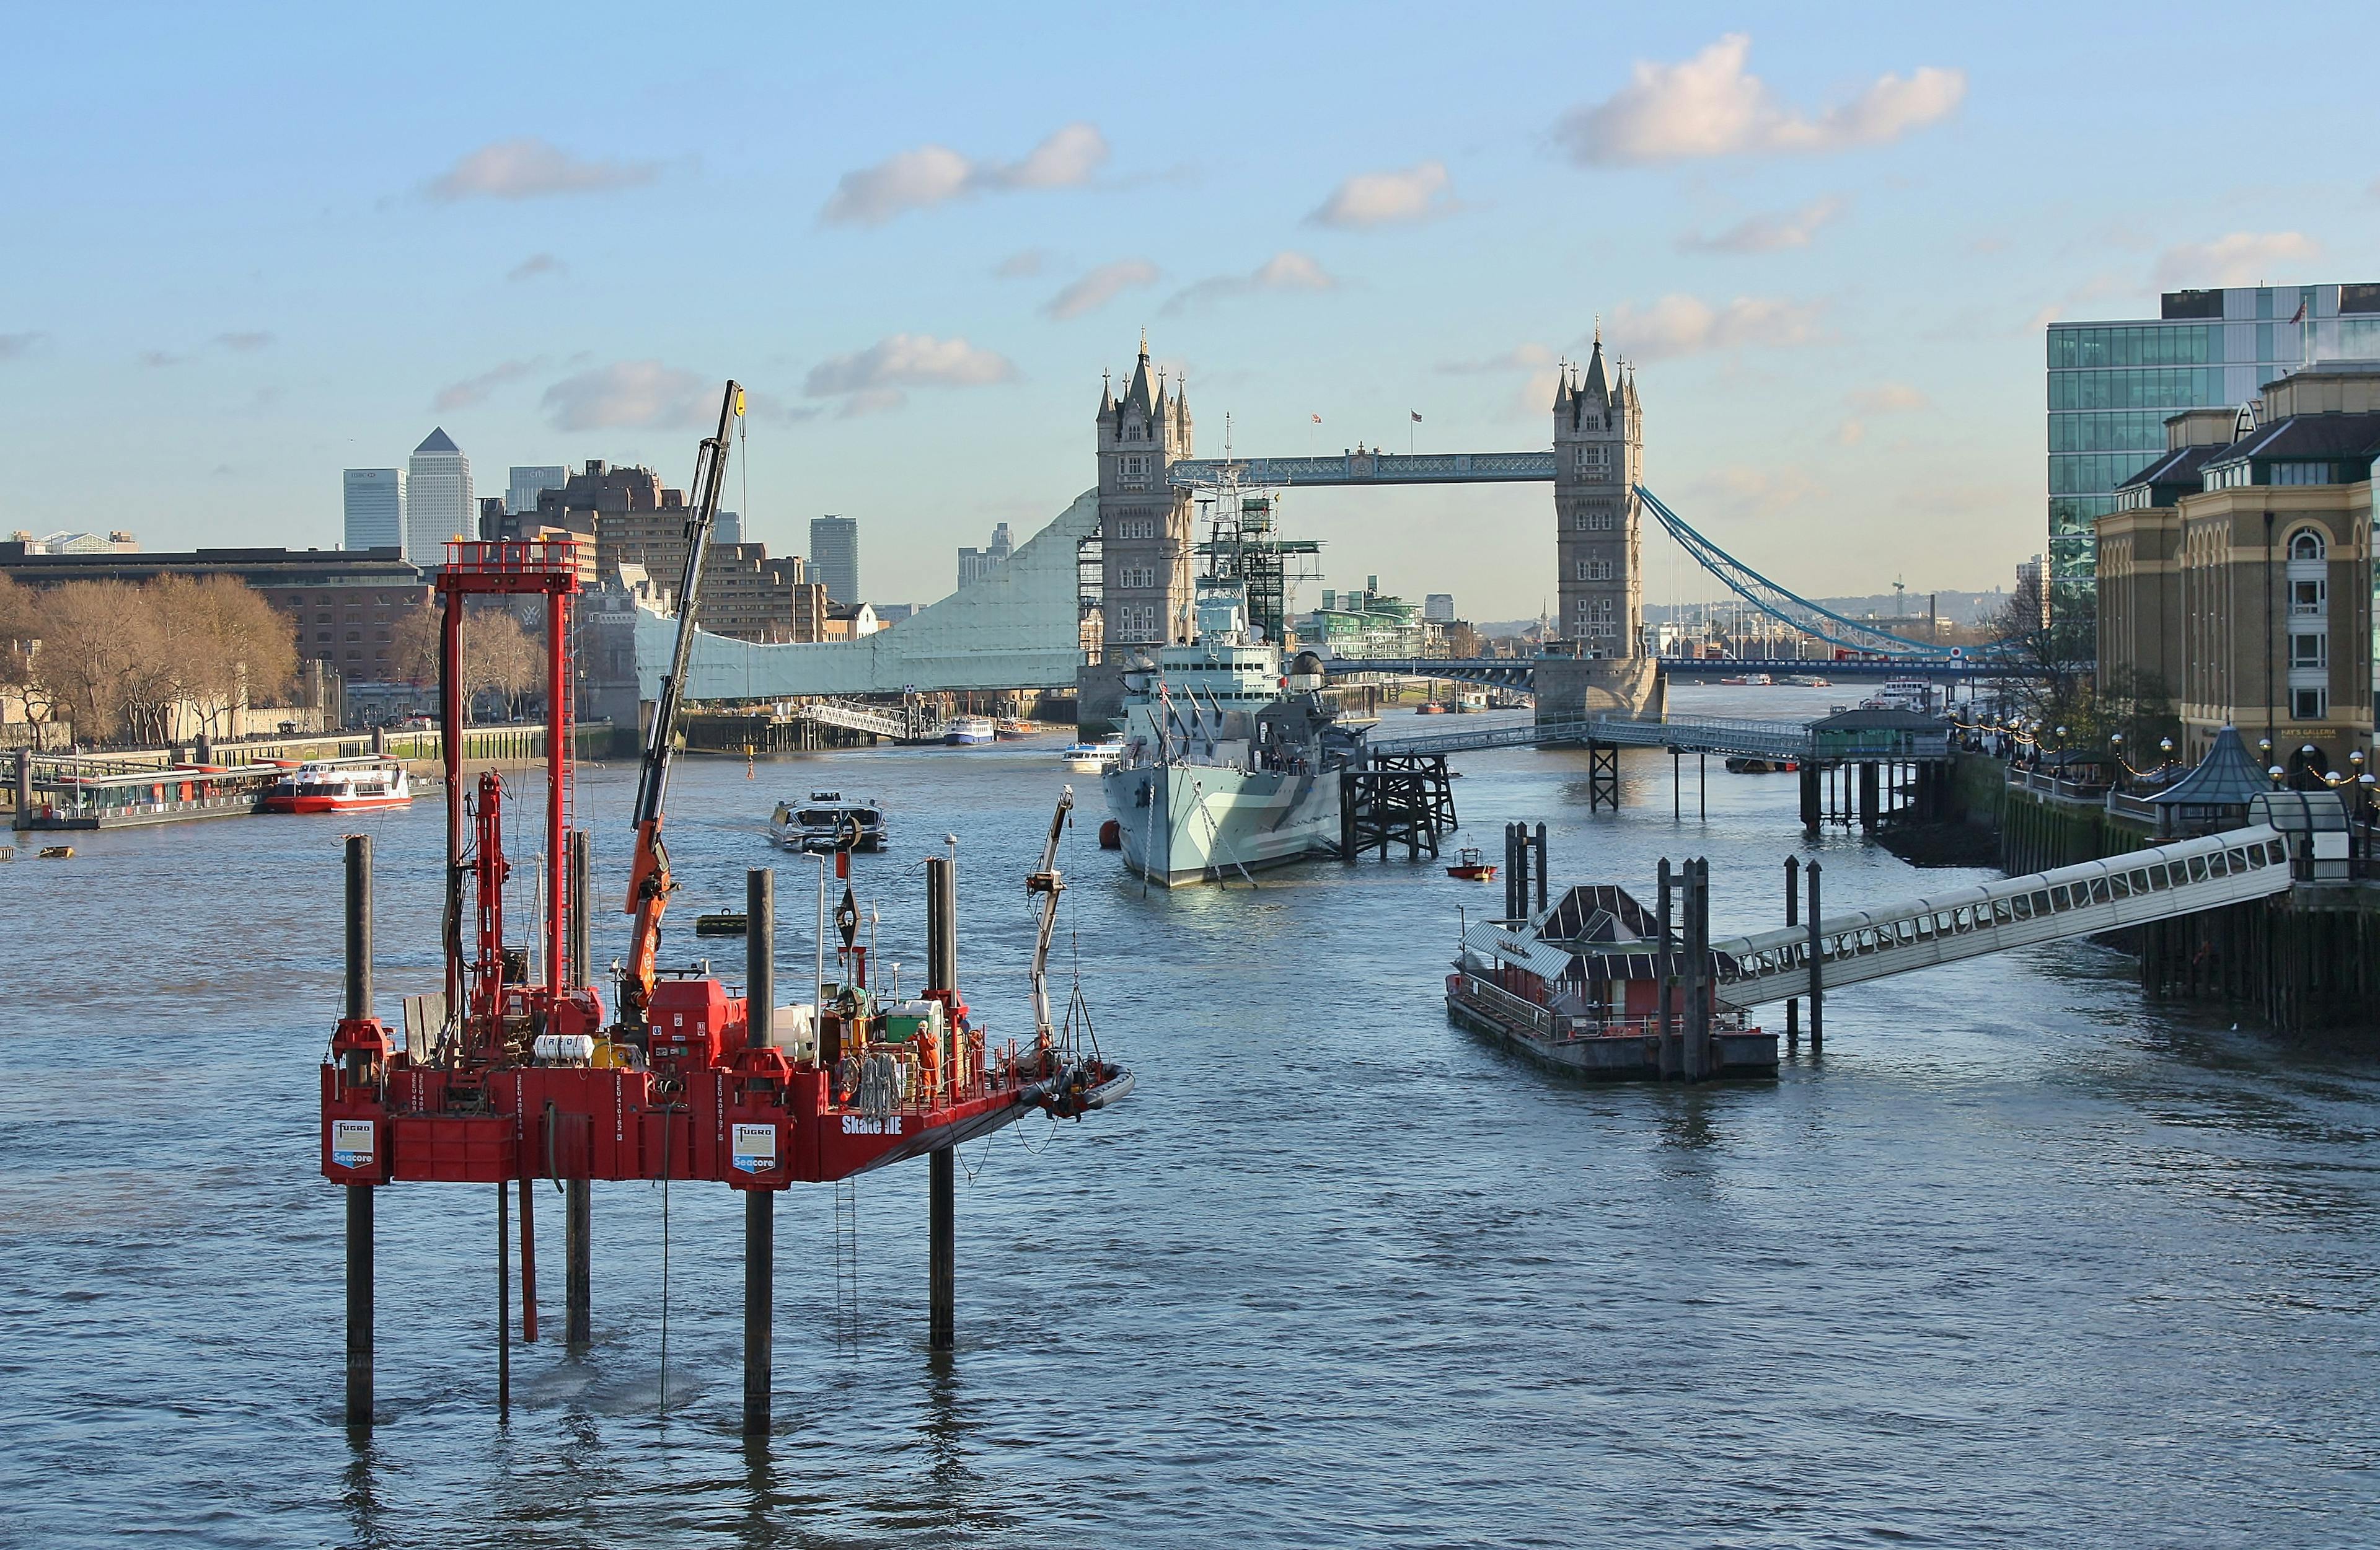 Fugro jack-up barge conducting geotechnical investigations along the River Thames in City of London near Tower Bridge. 

With the jack-up rig on the Thames, London, site investigations are being made to gather data on behalf of the Thames Tunnel Project